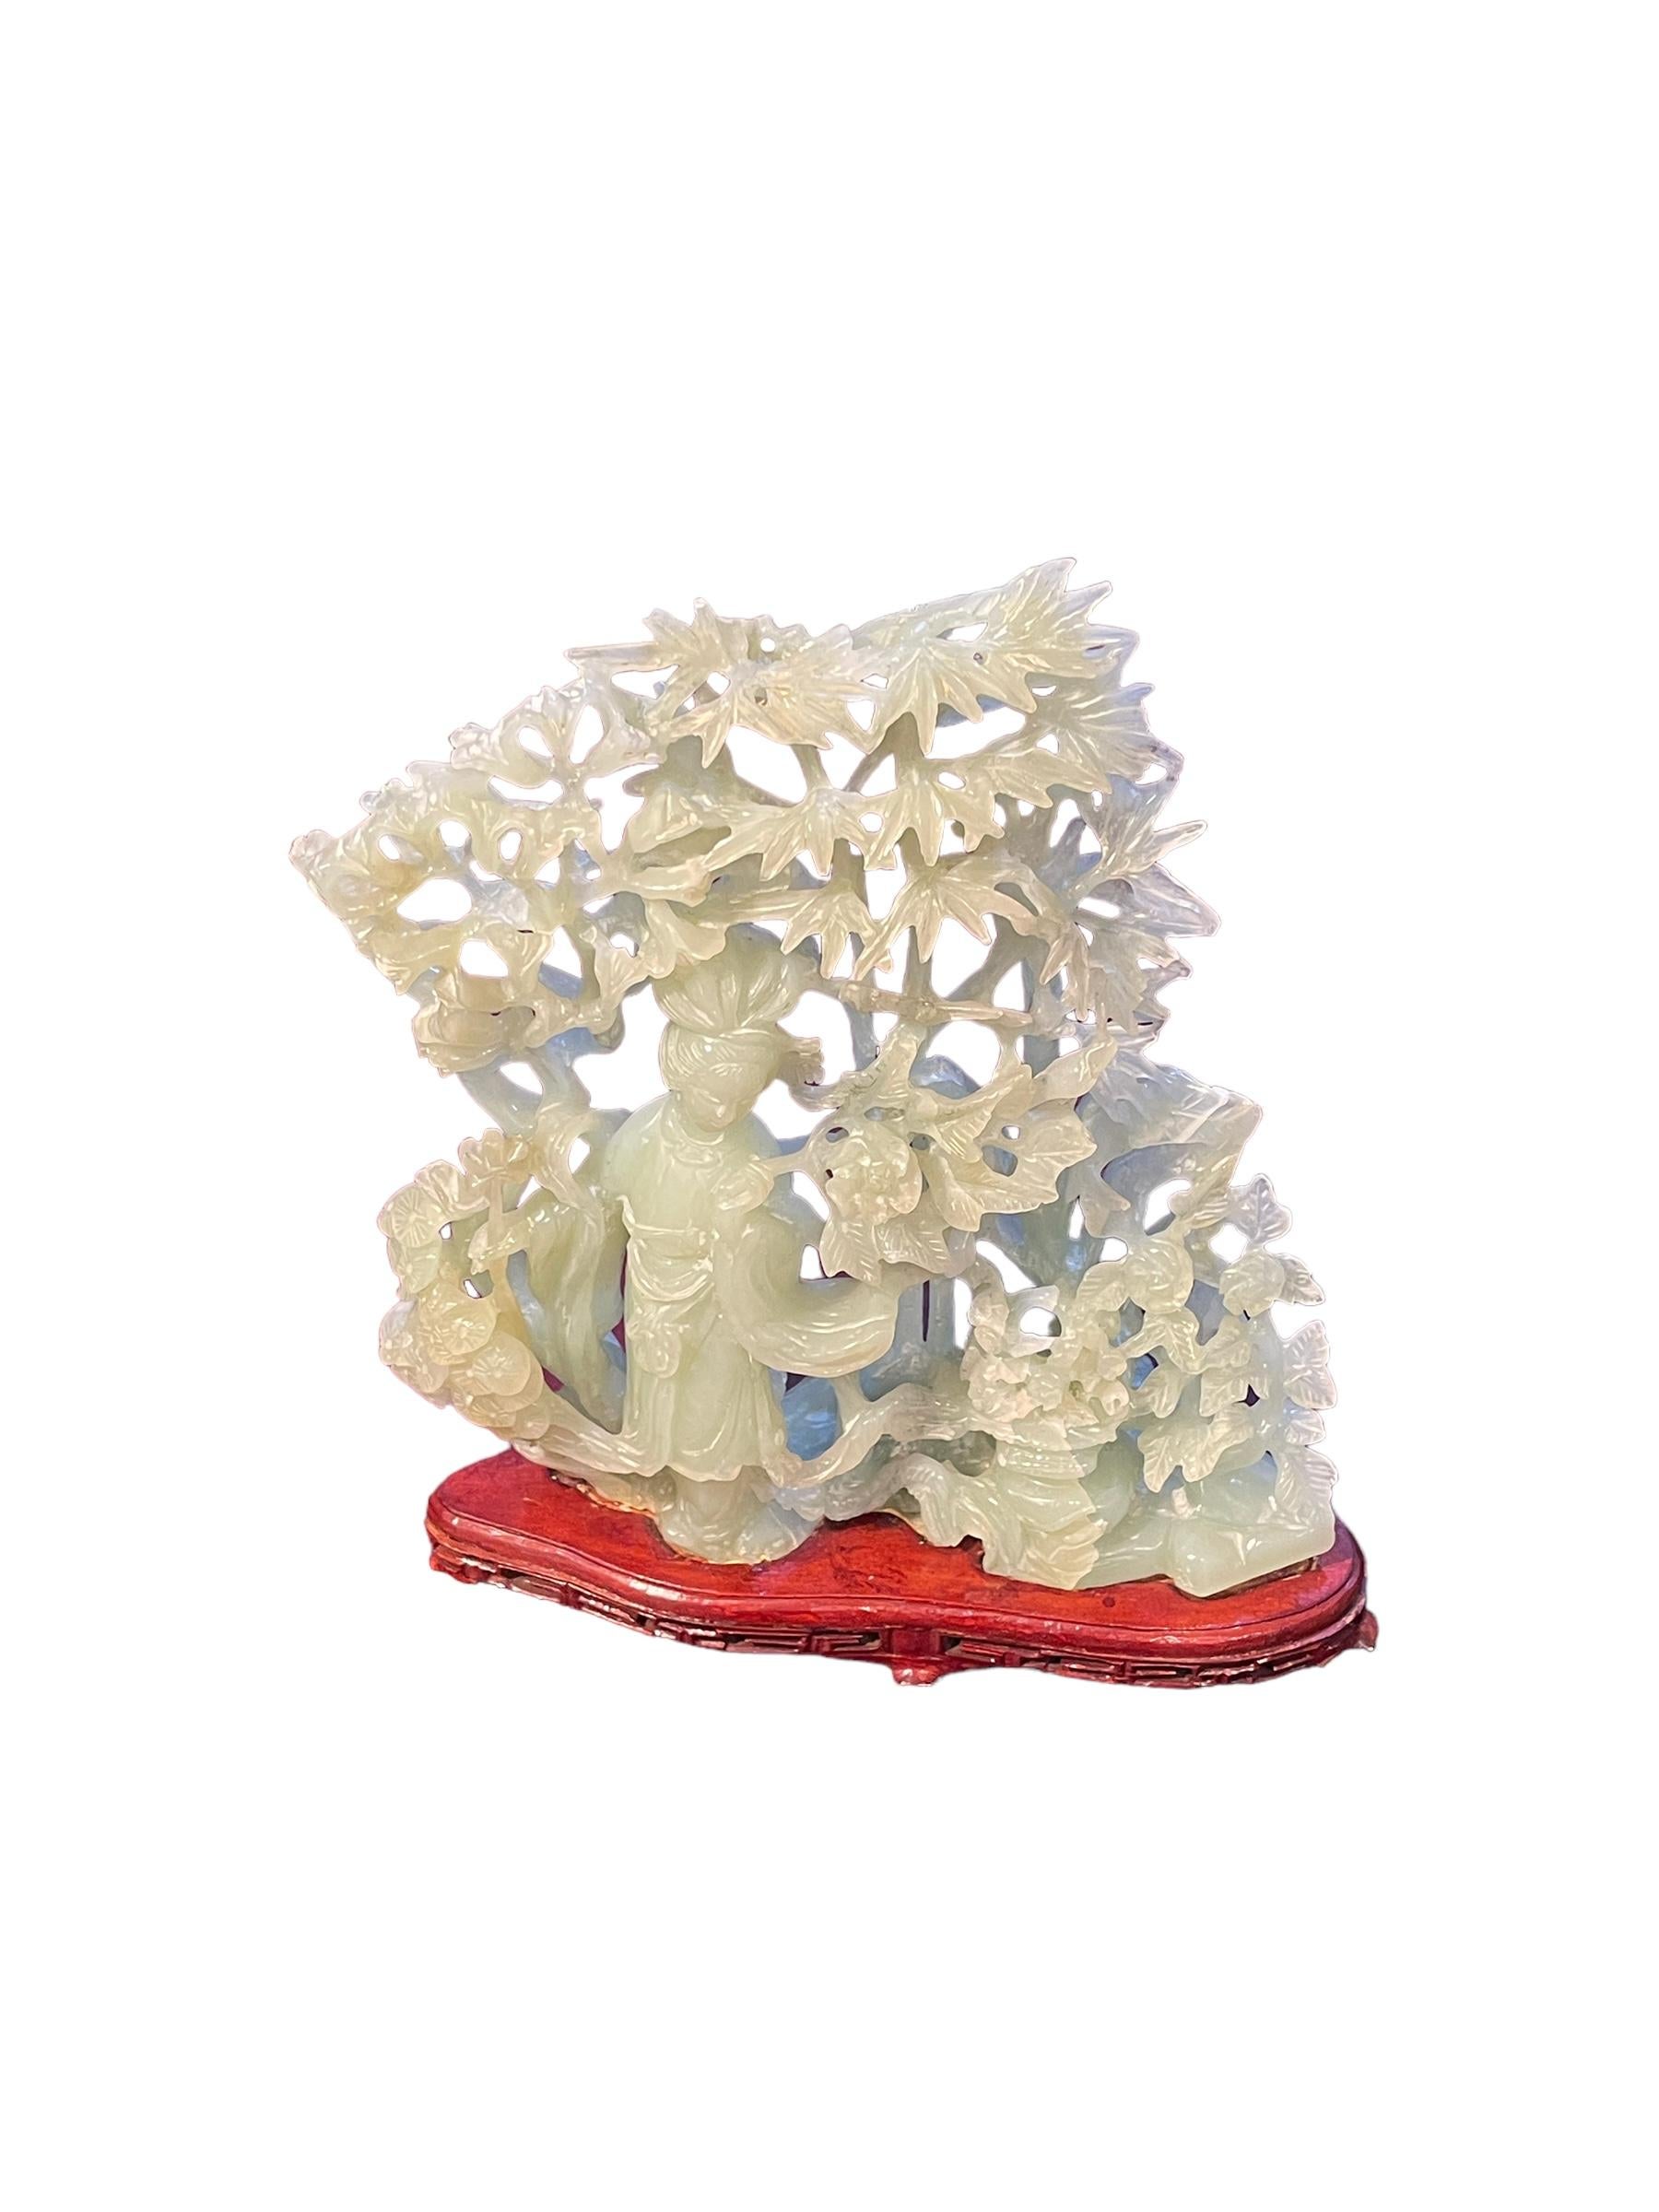 Qing Serpentine jade group, China, late 19th century For Sale